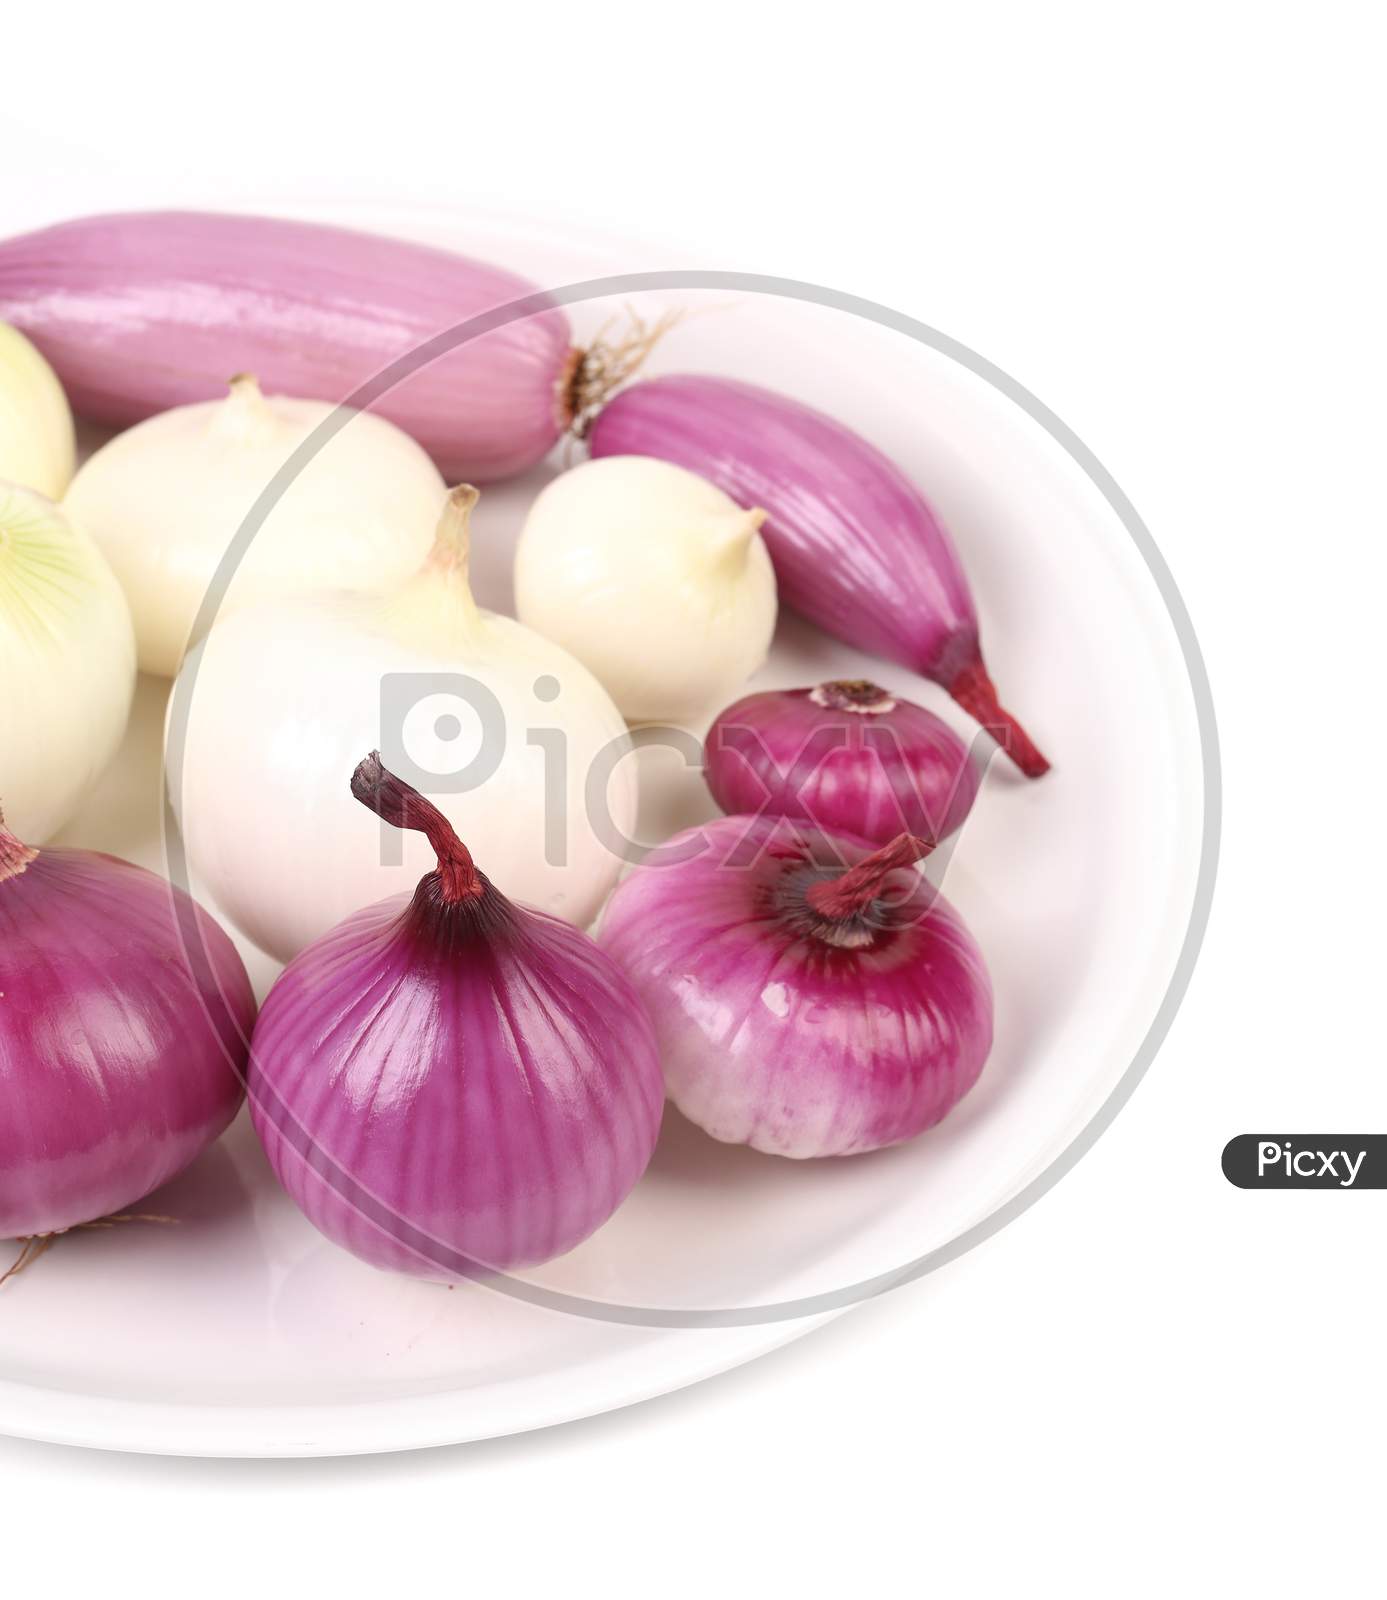 Wiew Of Different Onions On A Plate. There Is White Space For Text